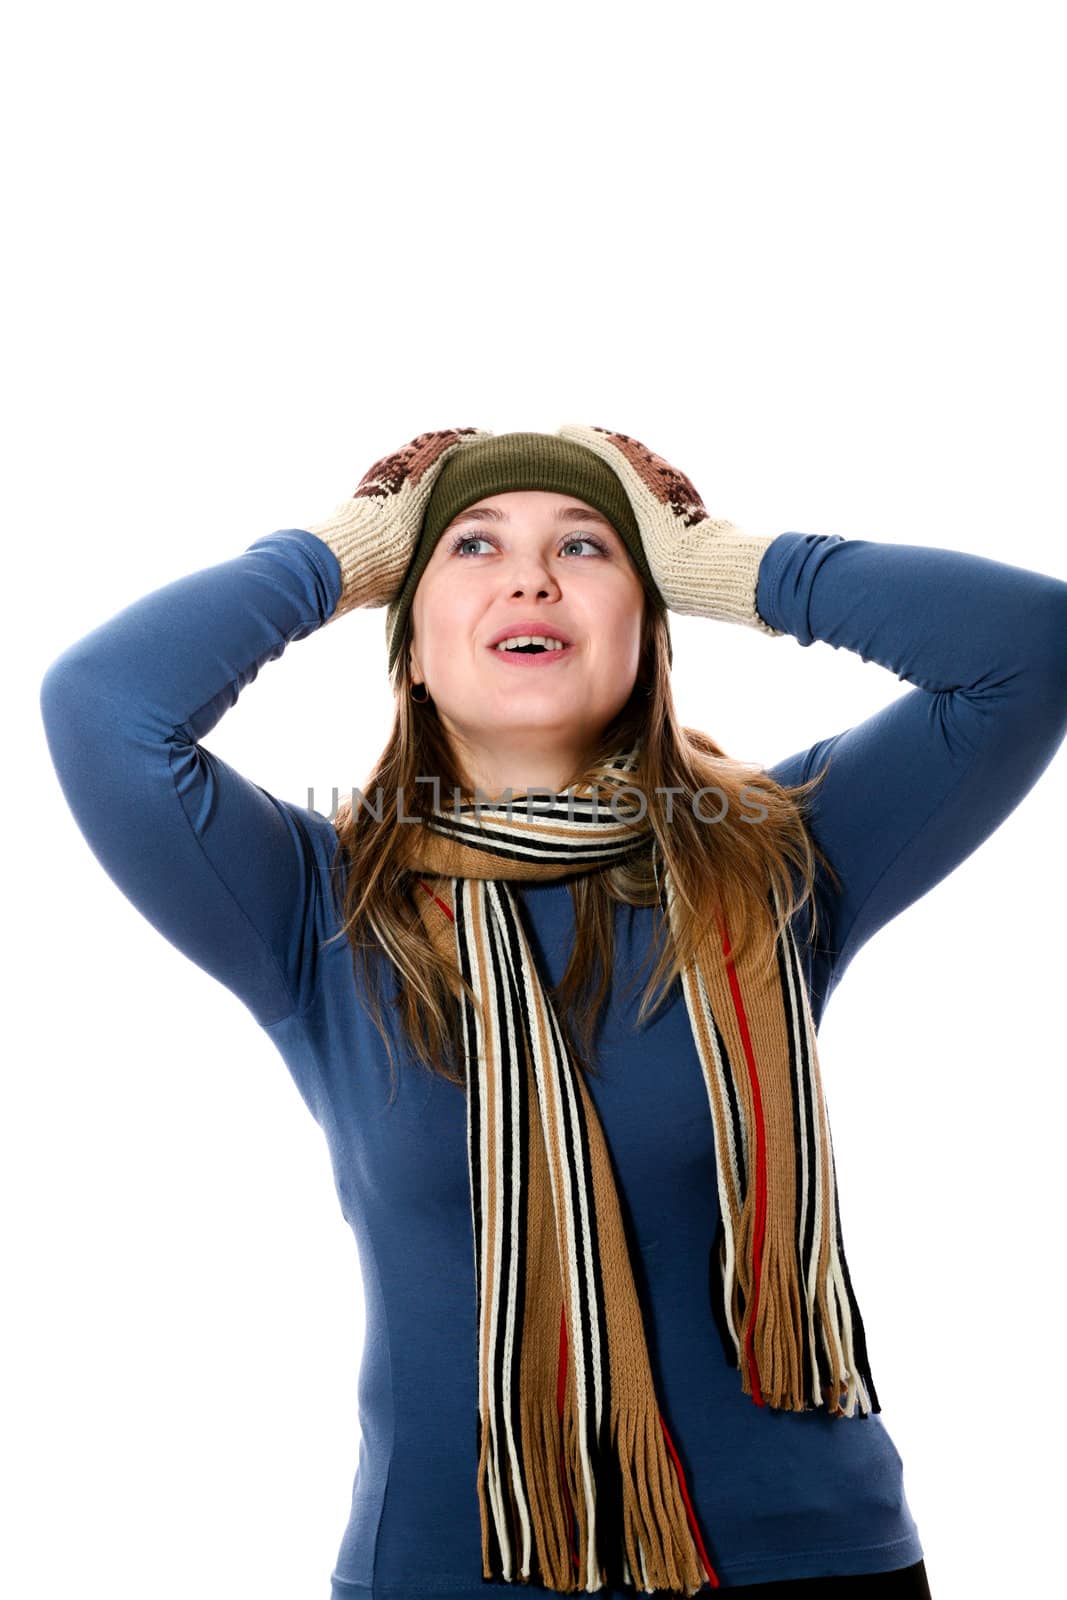 An image of a girl in a green hat and scarf